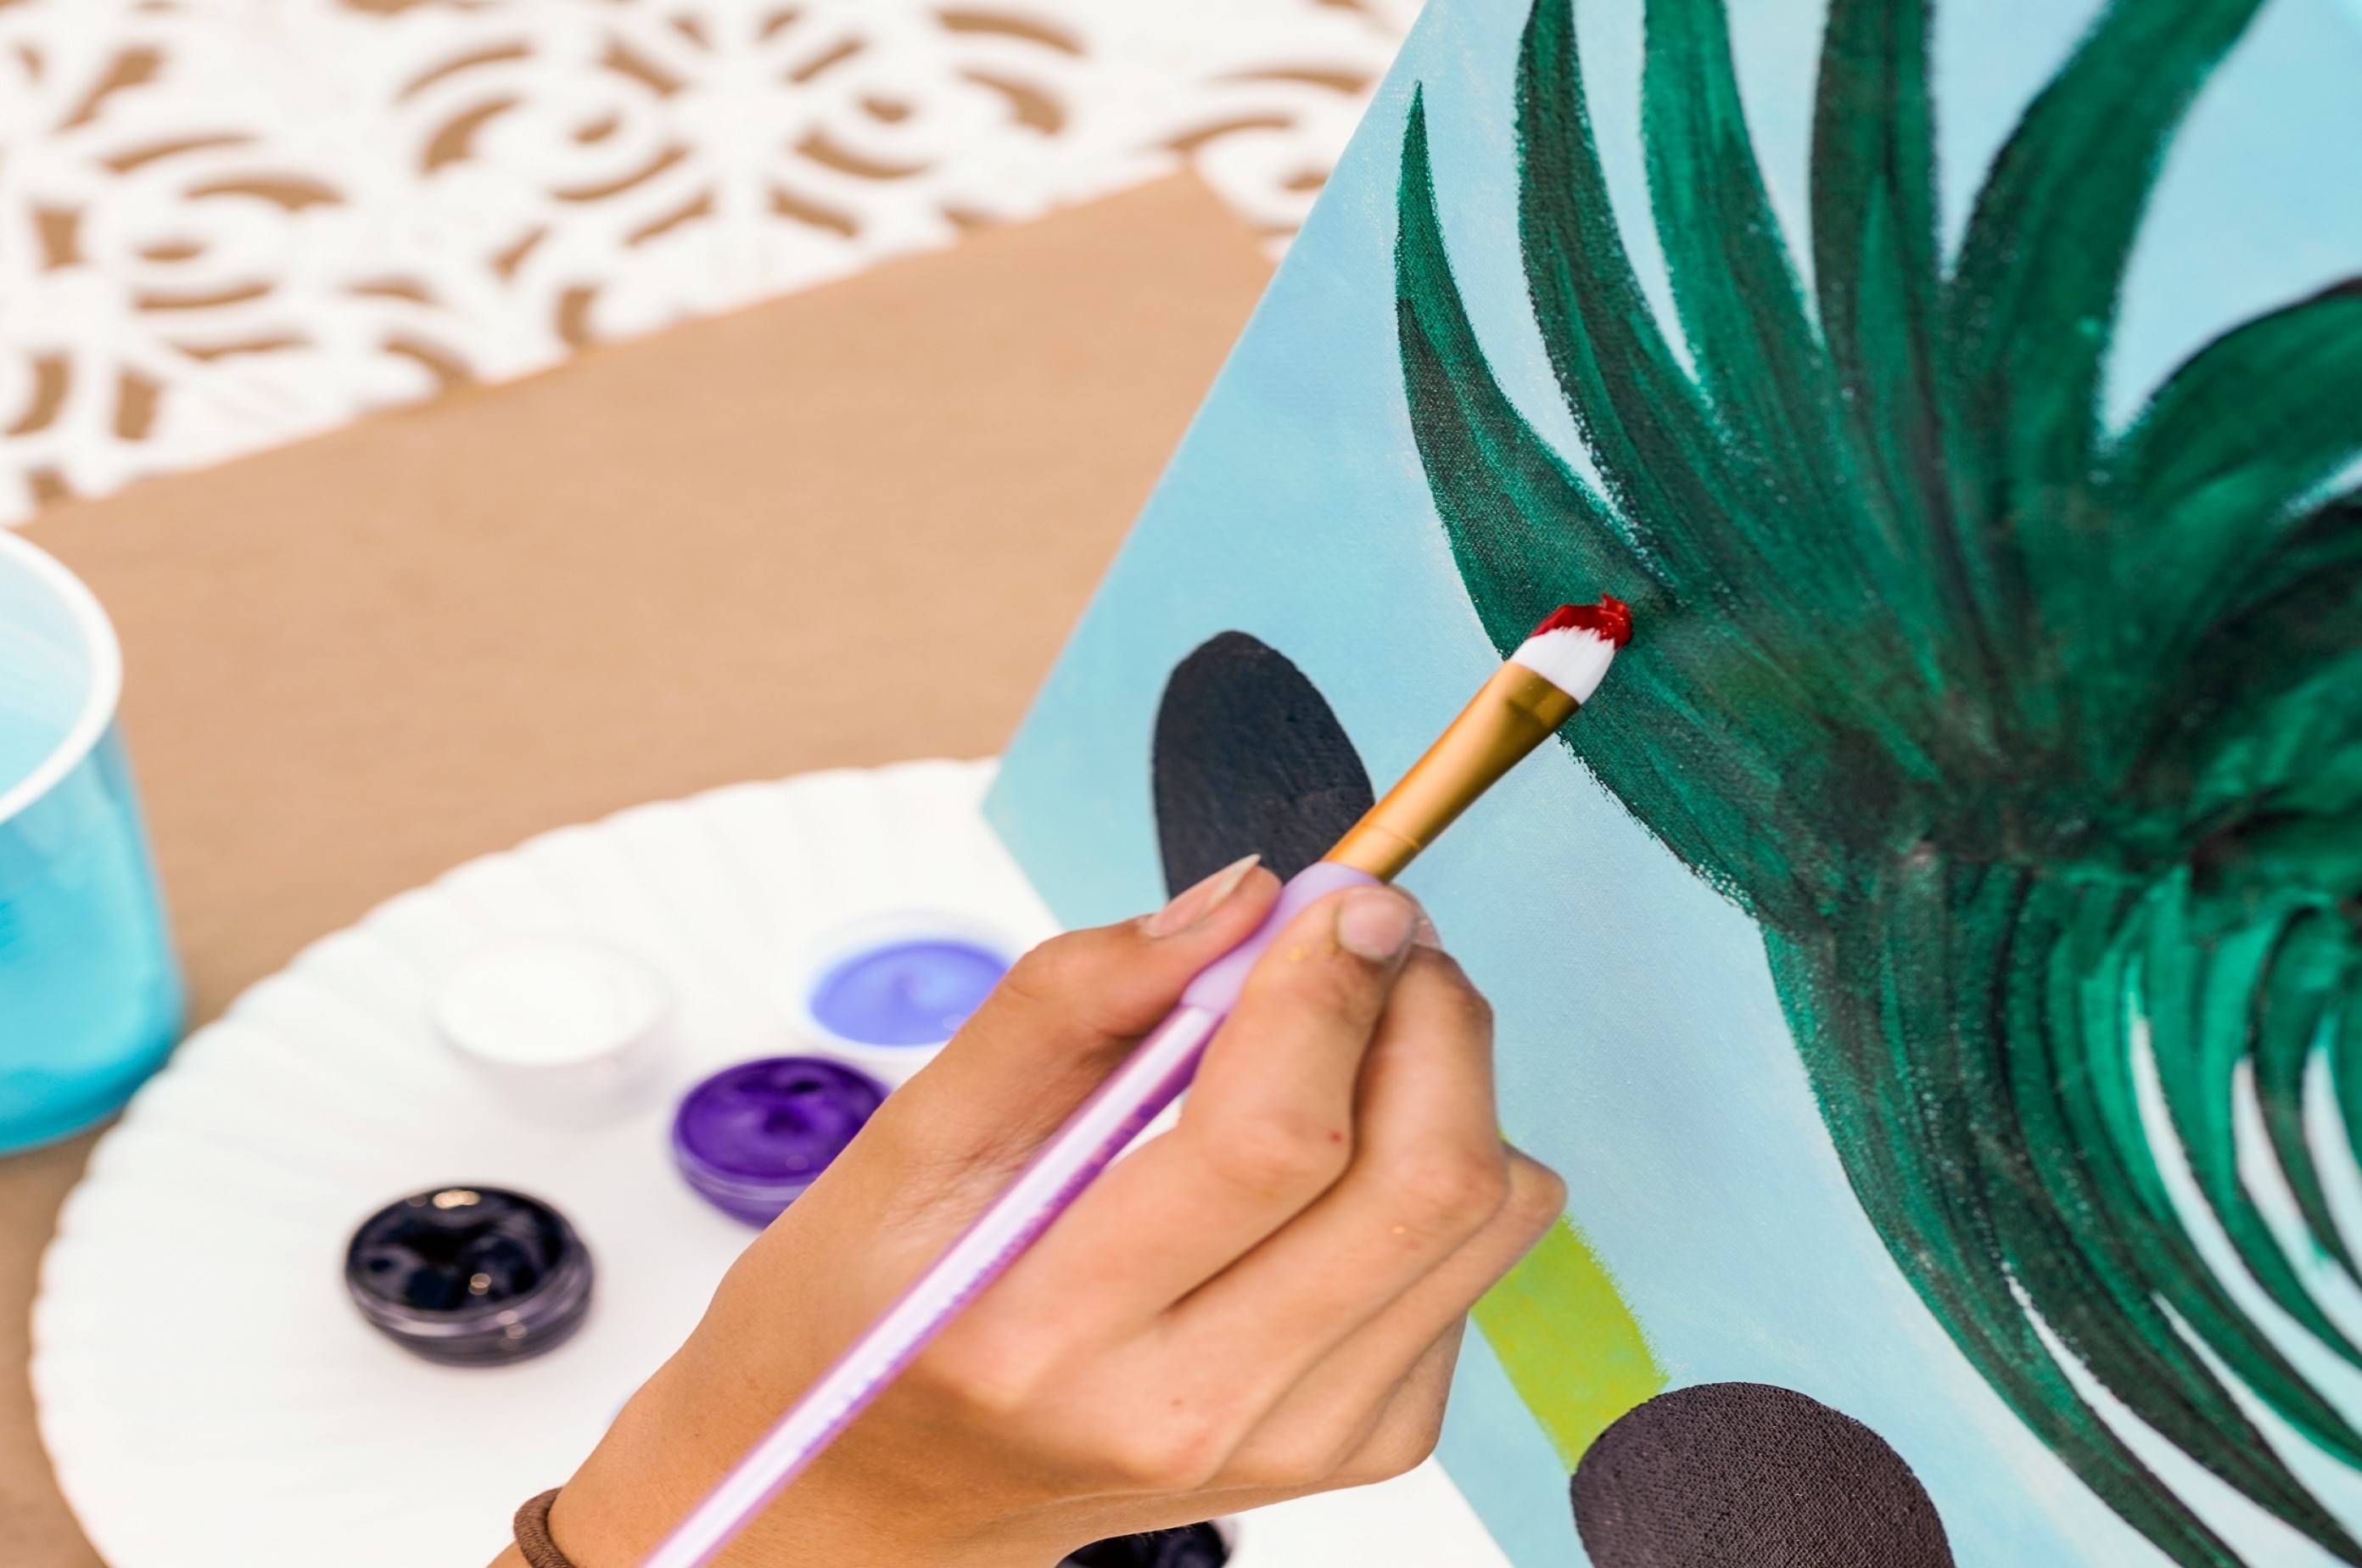 Drink, Laugh, Paint: How to Host a Painting Party